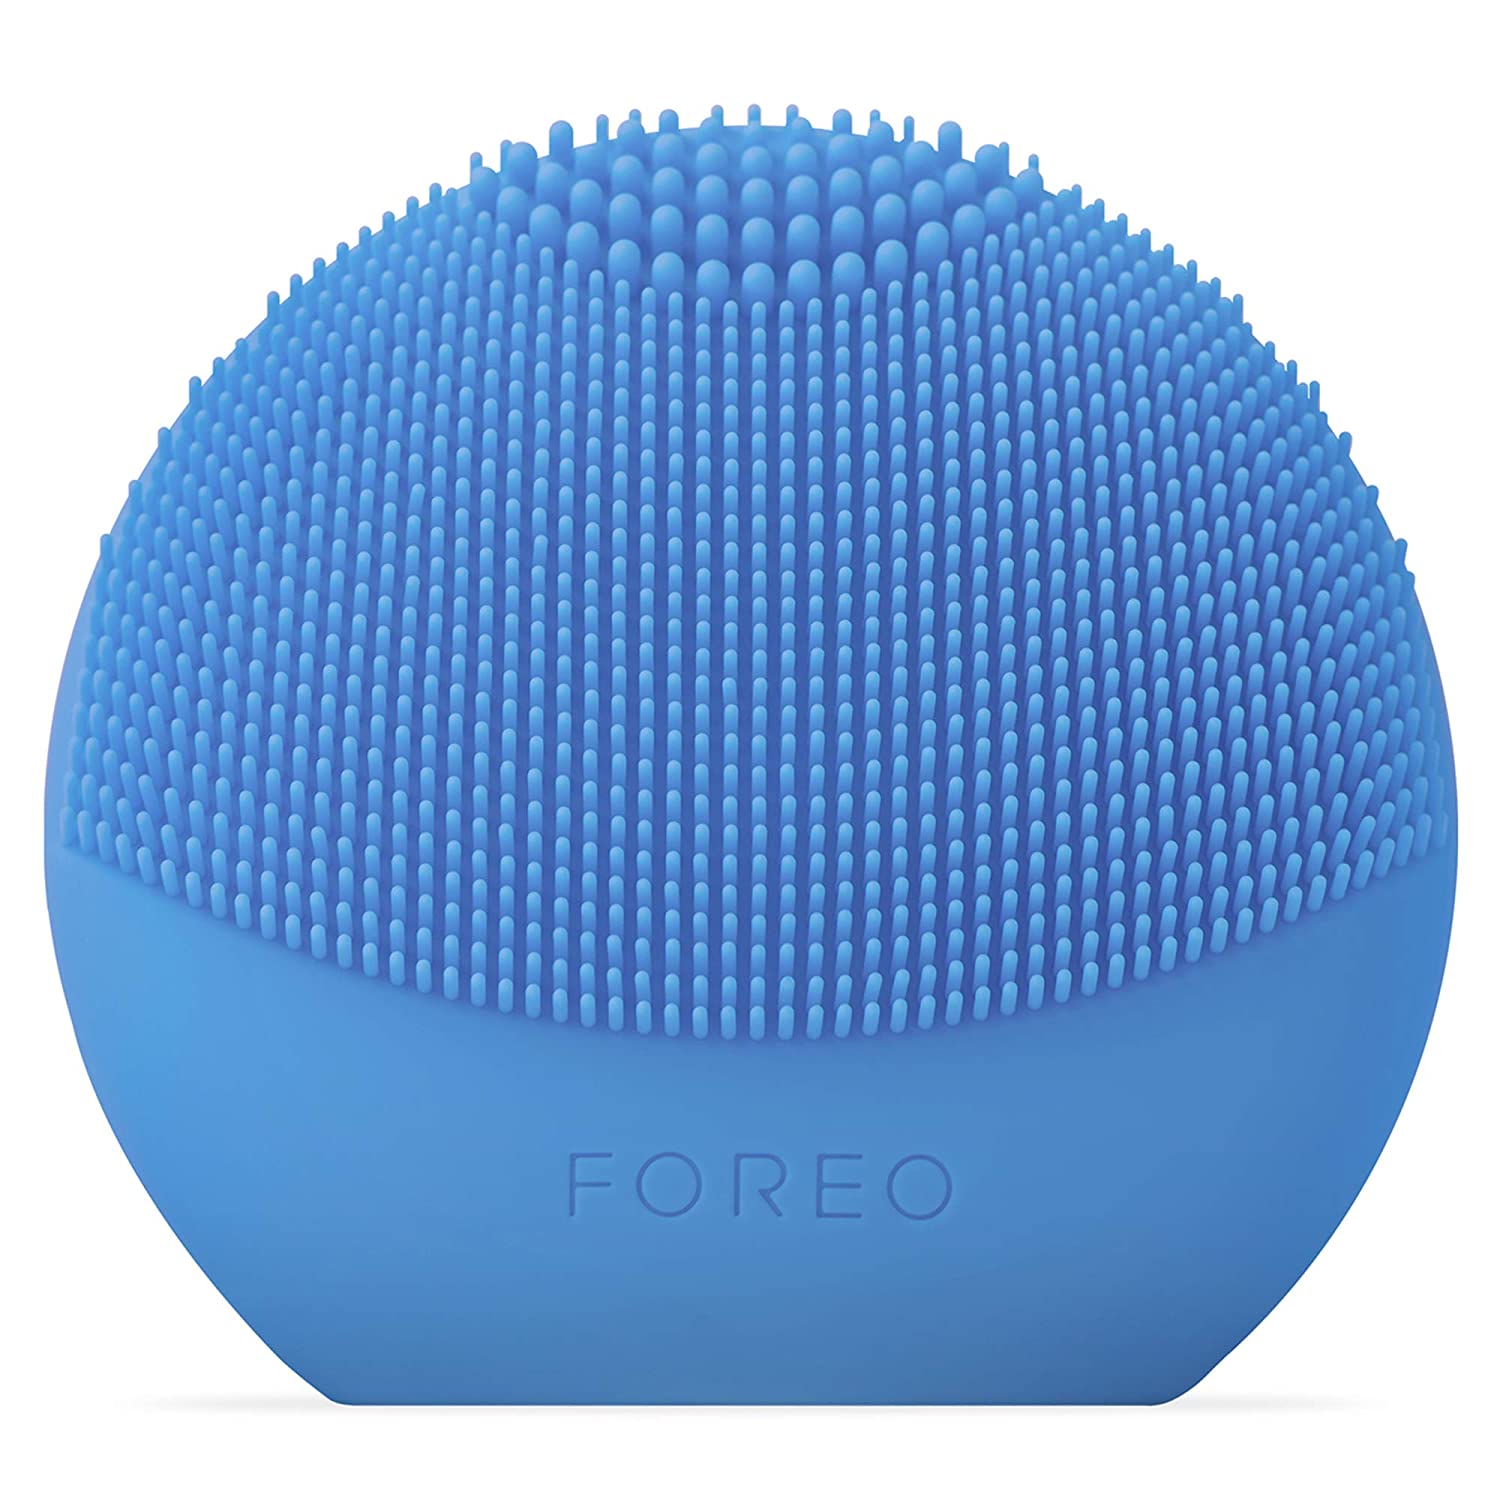 FOREO Luna Fofo Cleansers